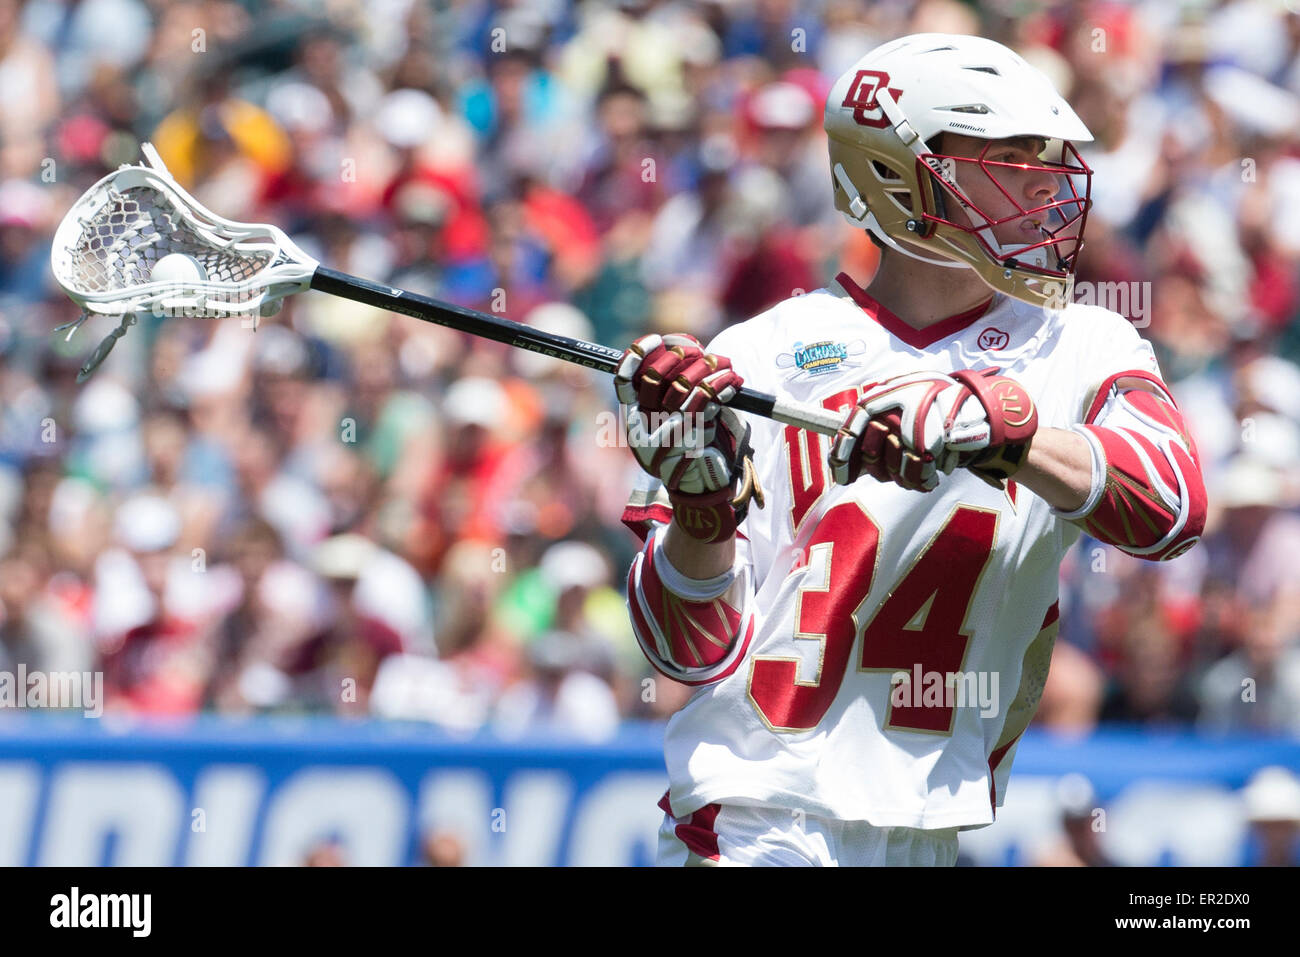 May 25, 2015: Denver Pioneers midfield Erik Adamson (34) in action during the championship in the NCAA Division I men's lacrosse tournament between the Maryland Terrapins and the Denver Pioneers at Lincoln Financial Field in Philadelphia, Pennsylvania. Christopher Szagola/CSM Stock Photo